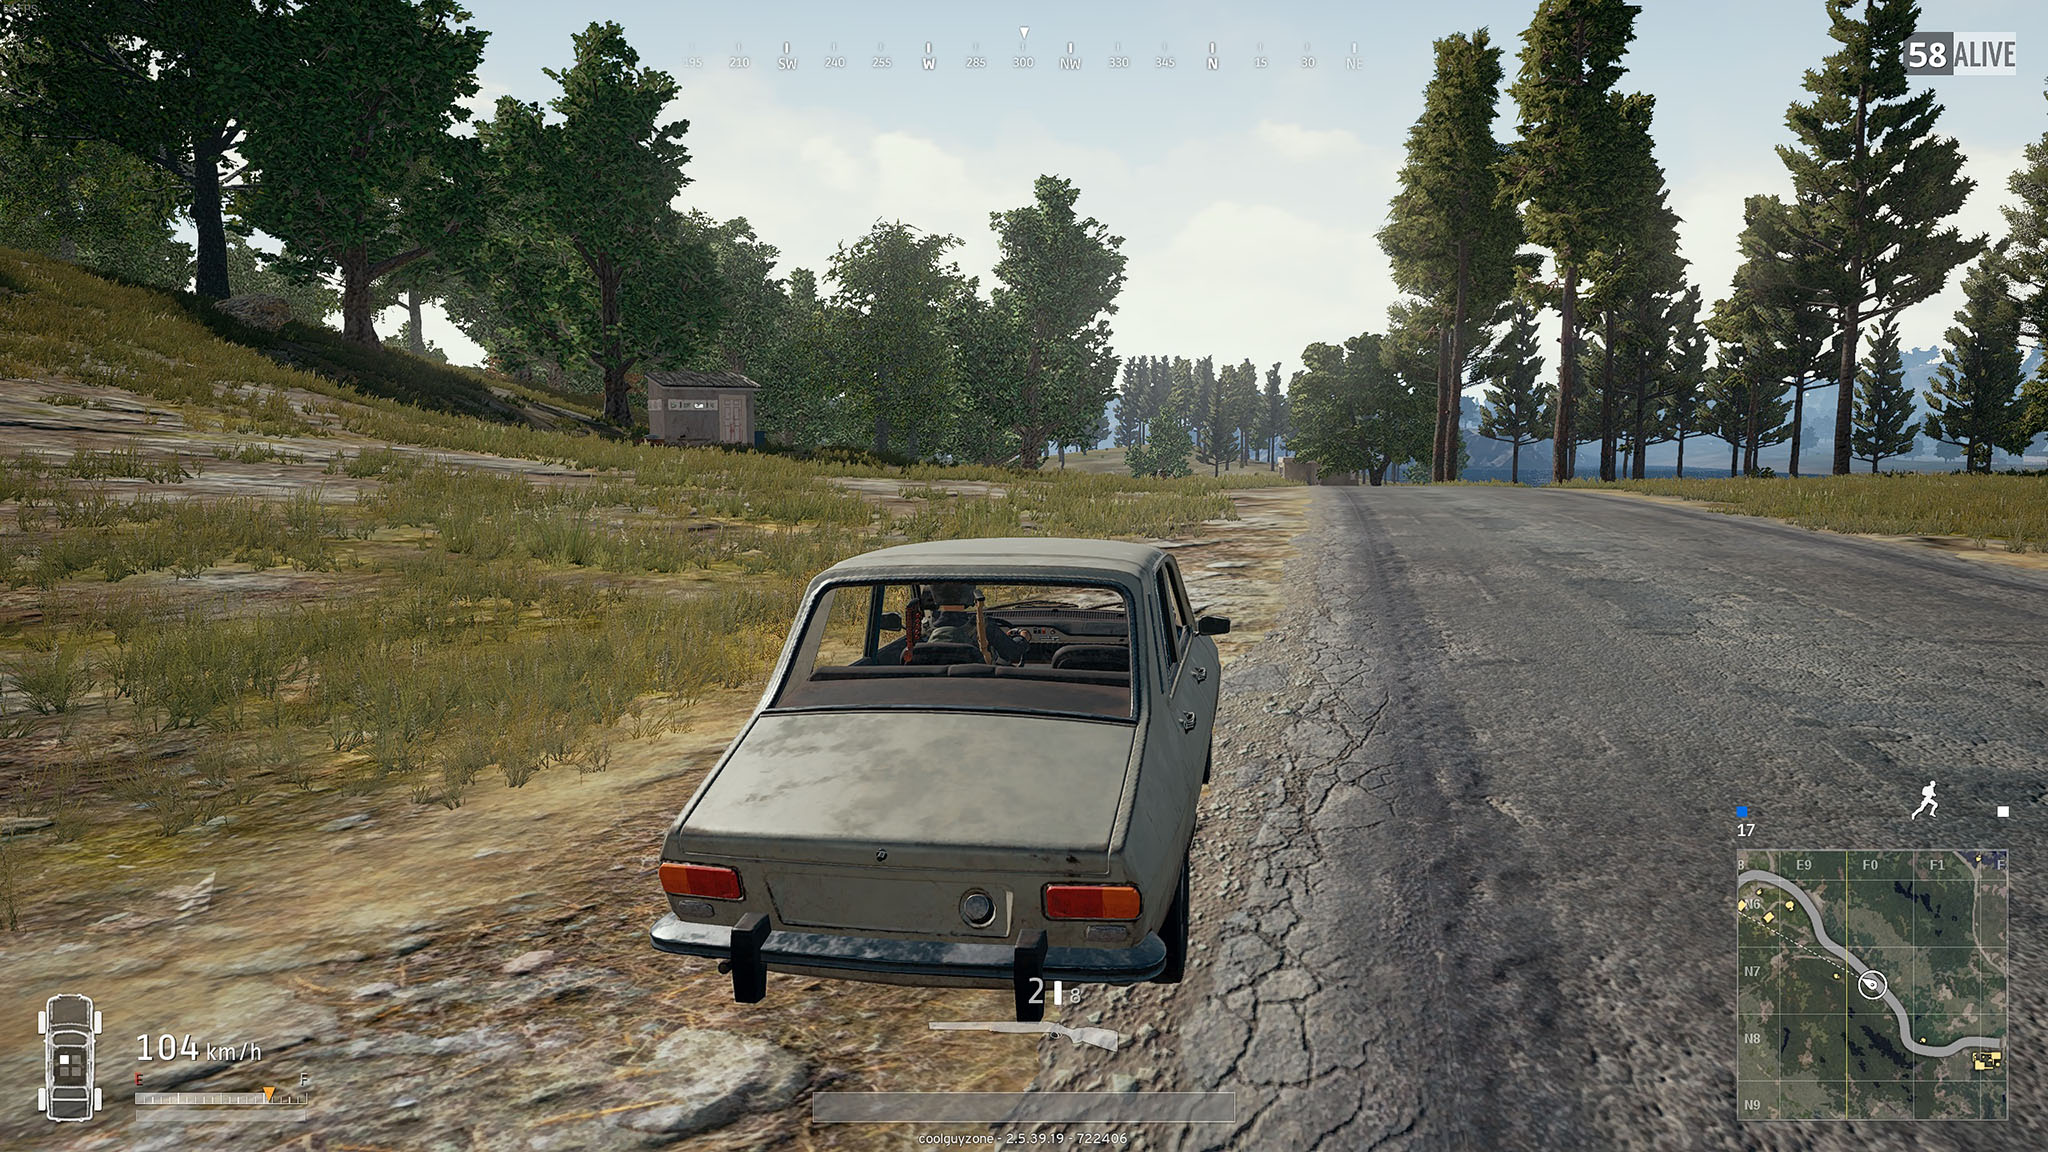 Casually driving in PUBG